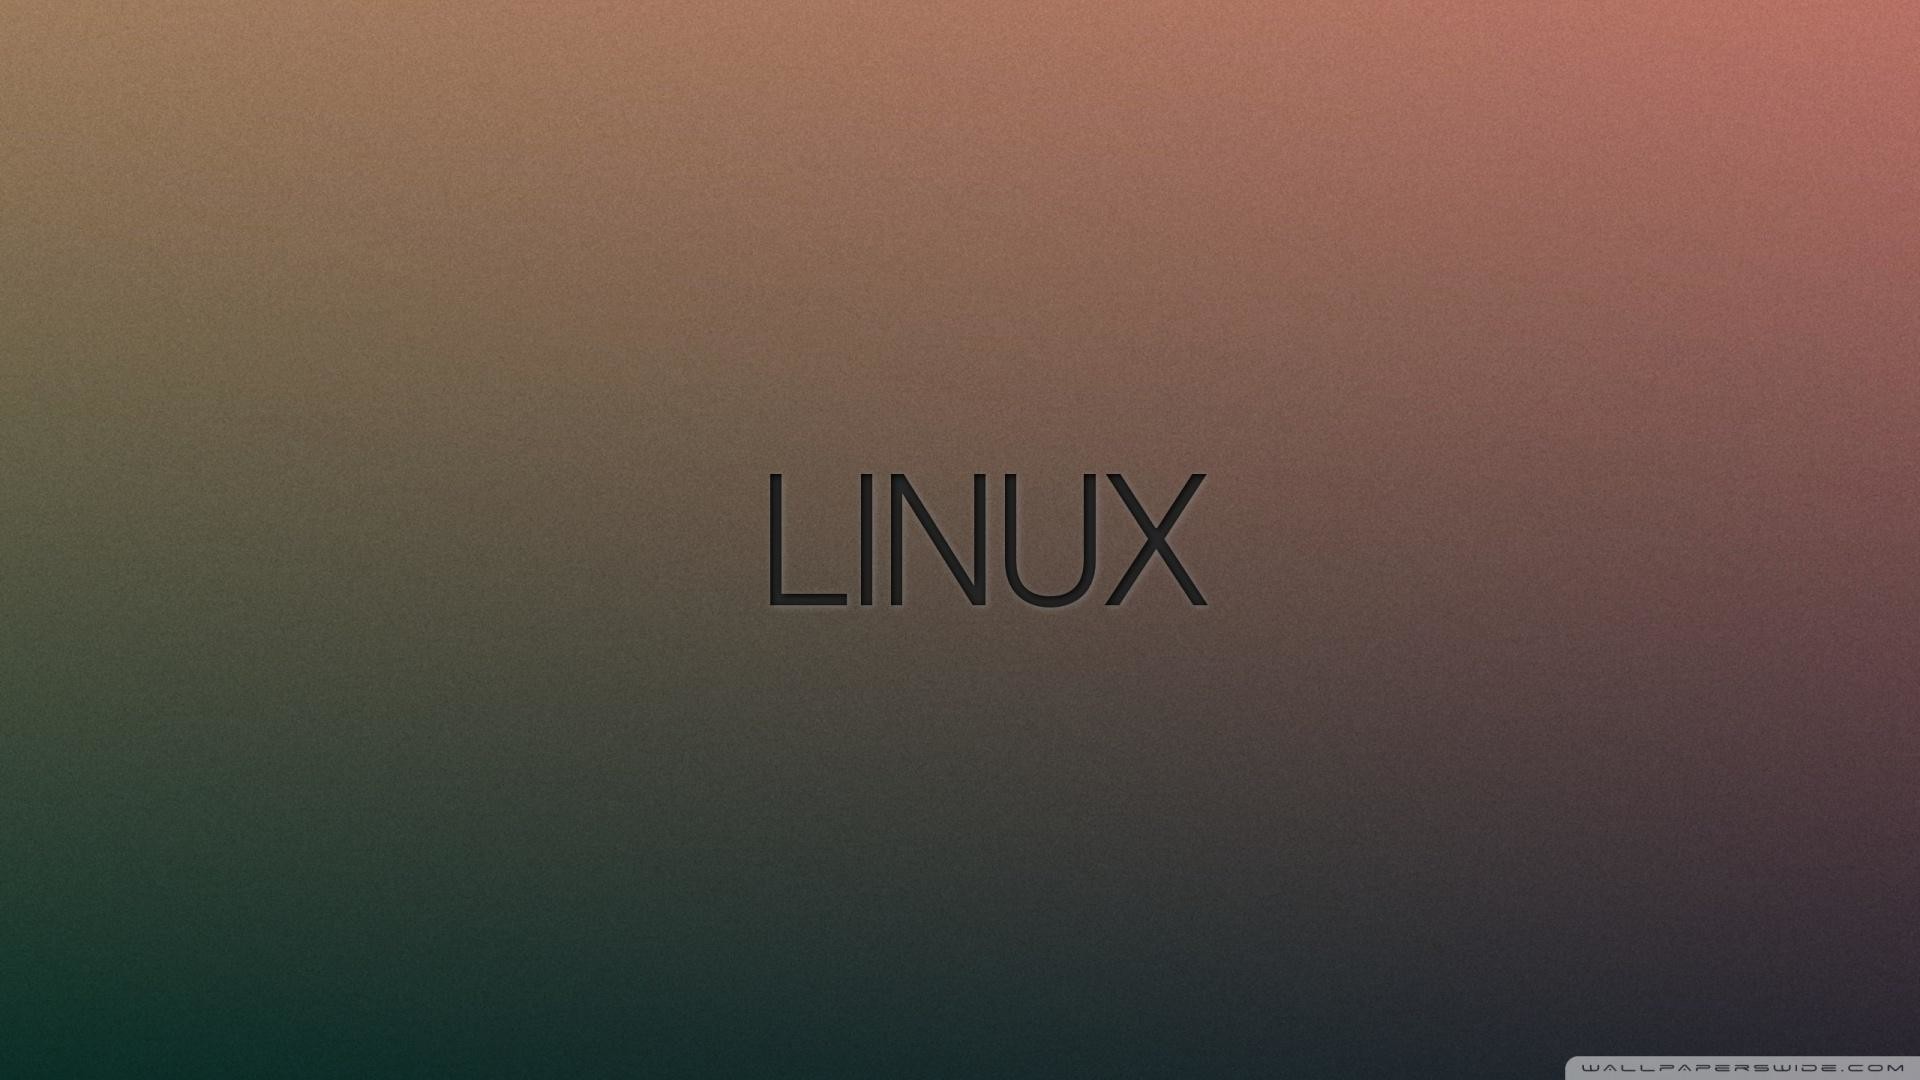 7. linux wallpapers HD8 600×338